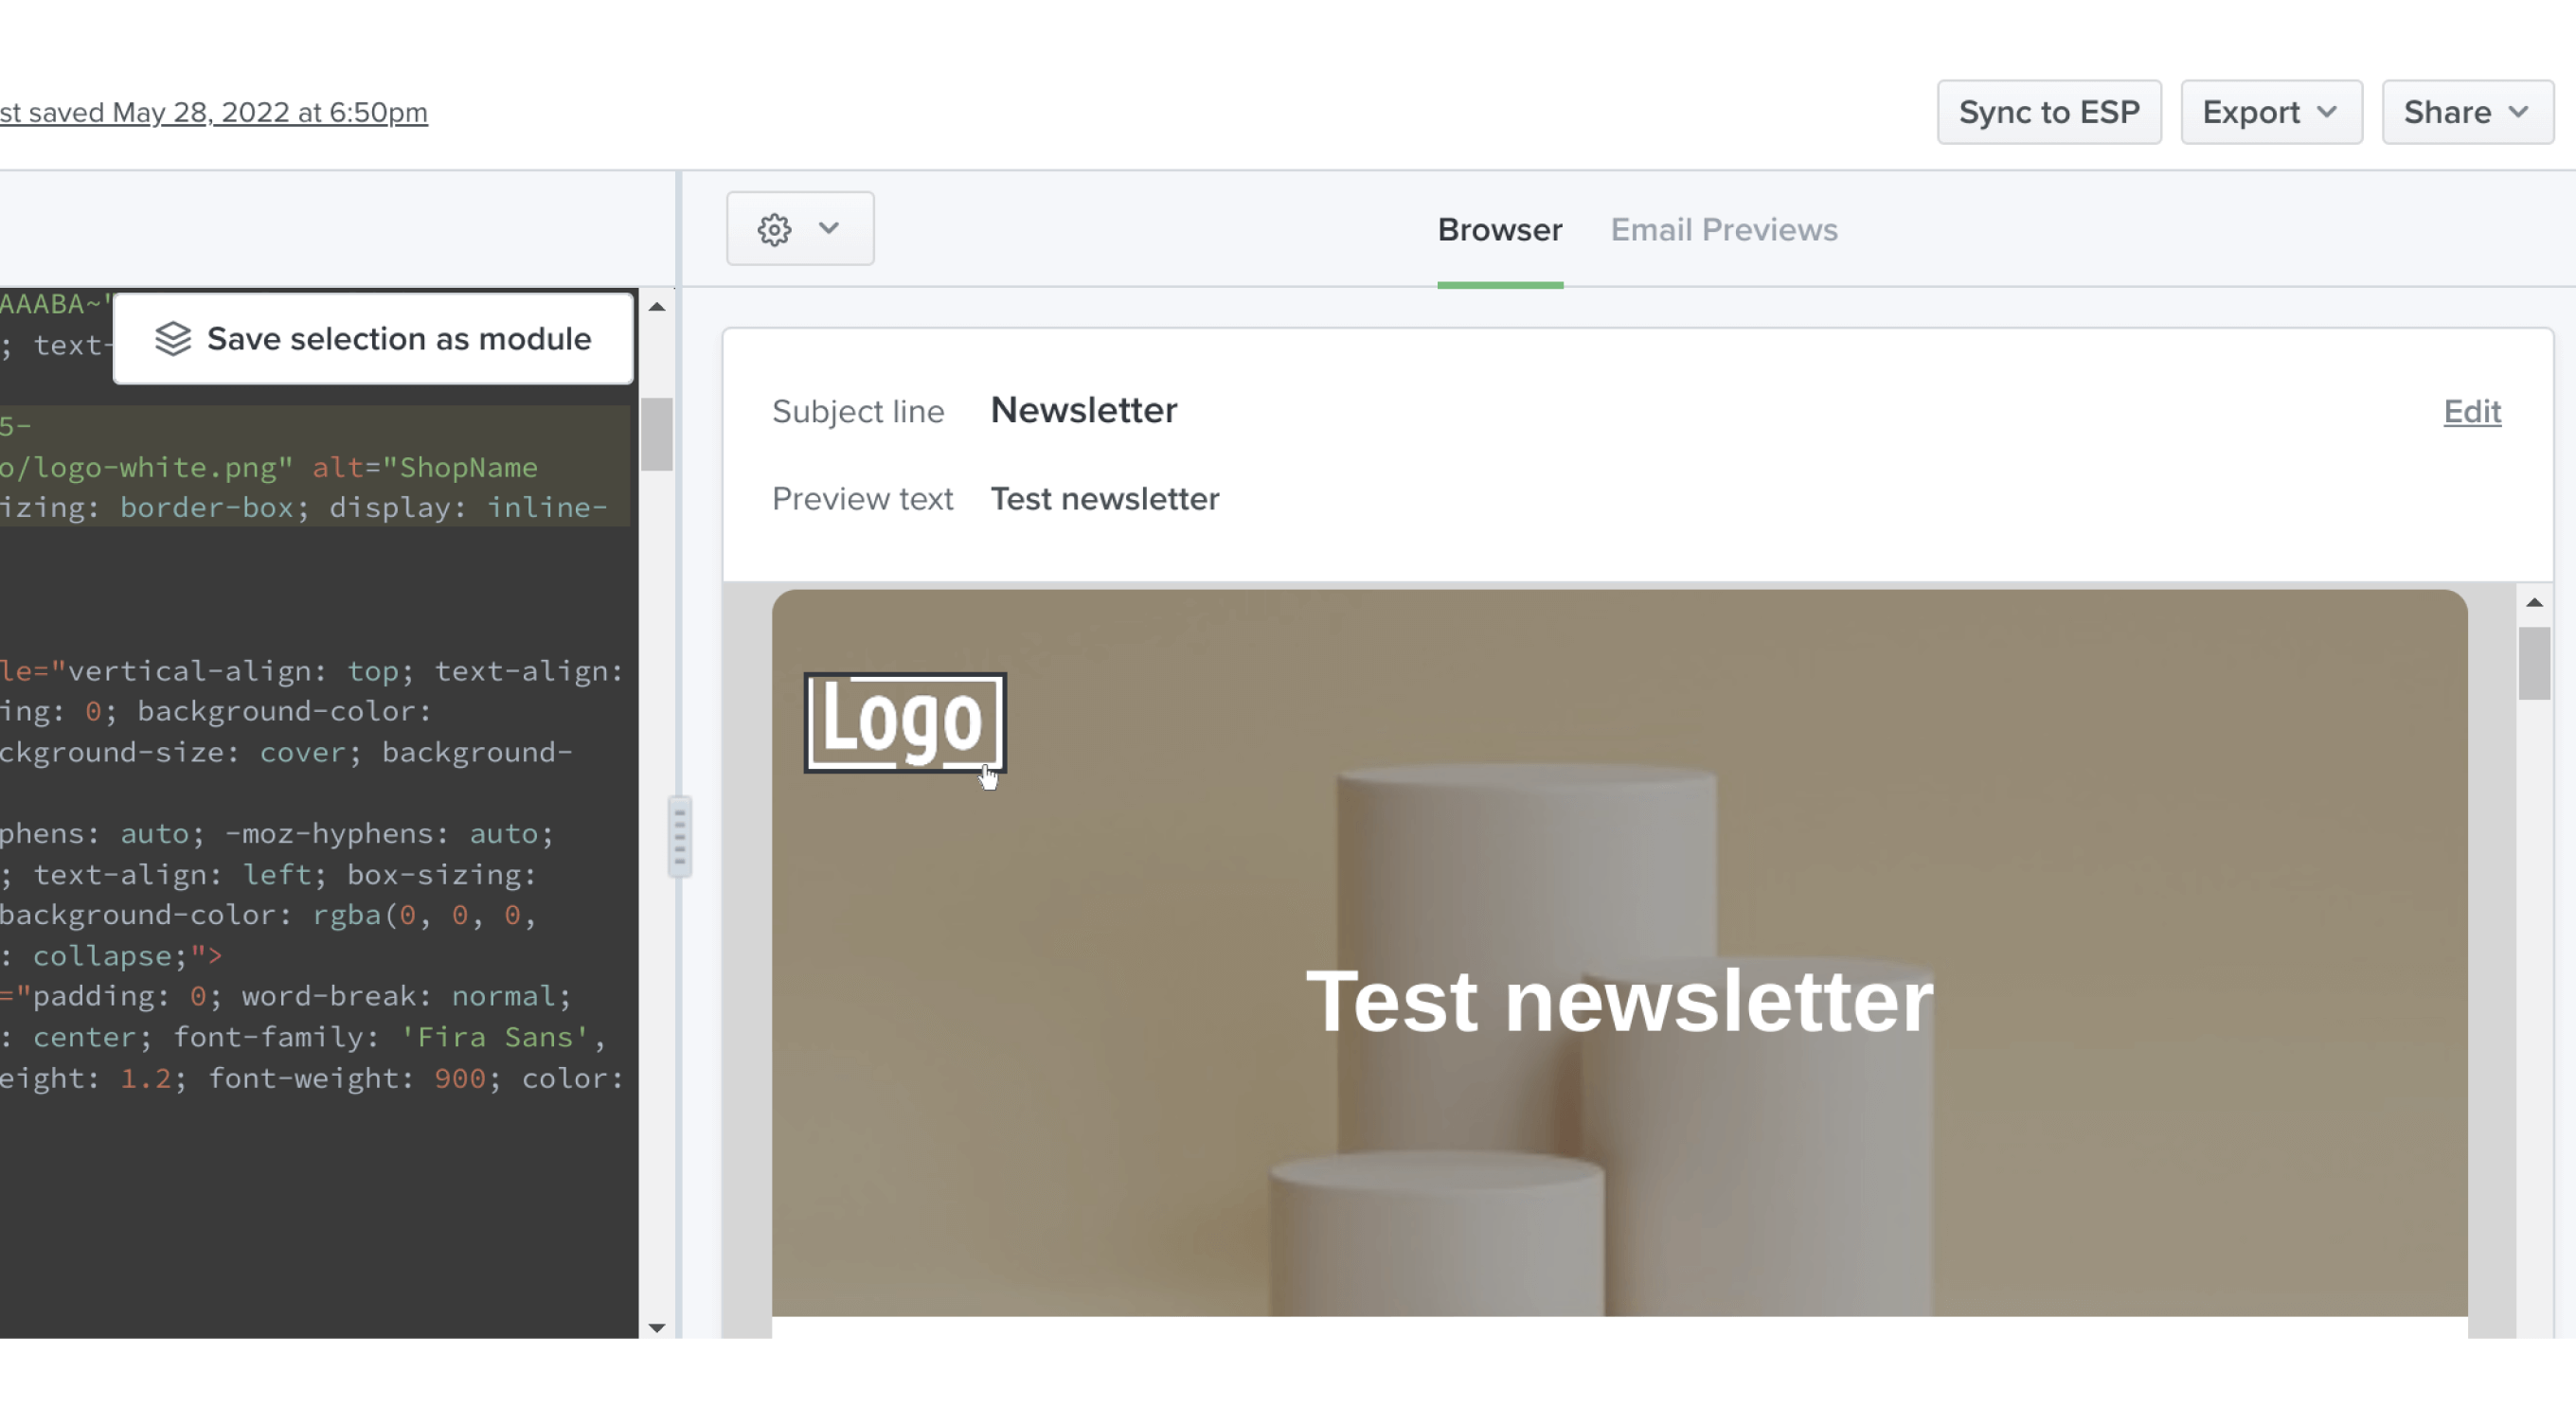 How to Use Drupal Layout Builder to Make Newsletters Look Good - email preview - Lemberg Solutions